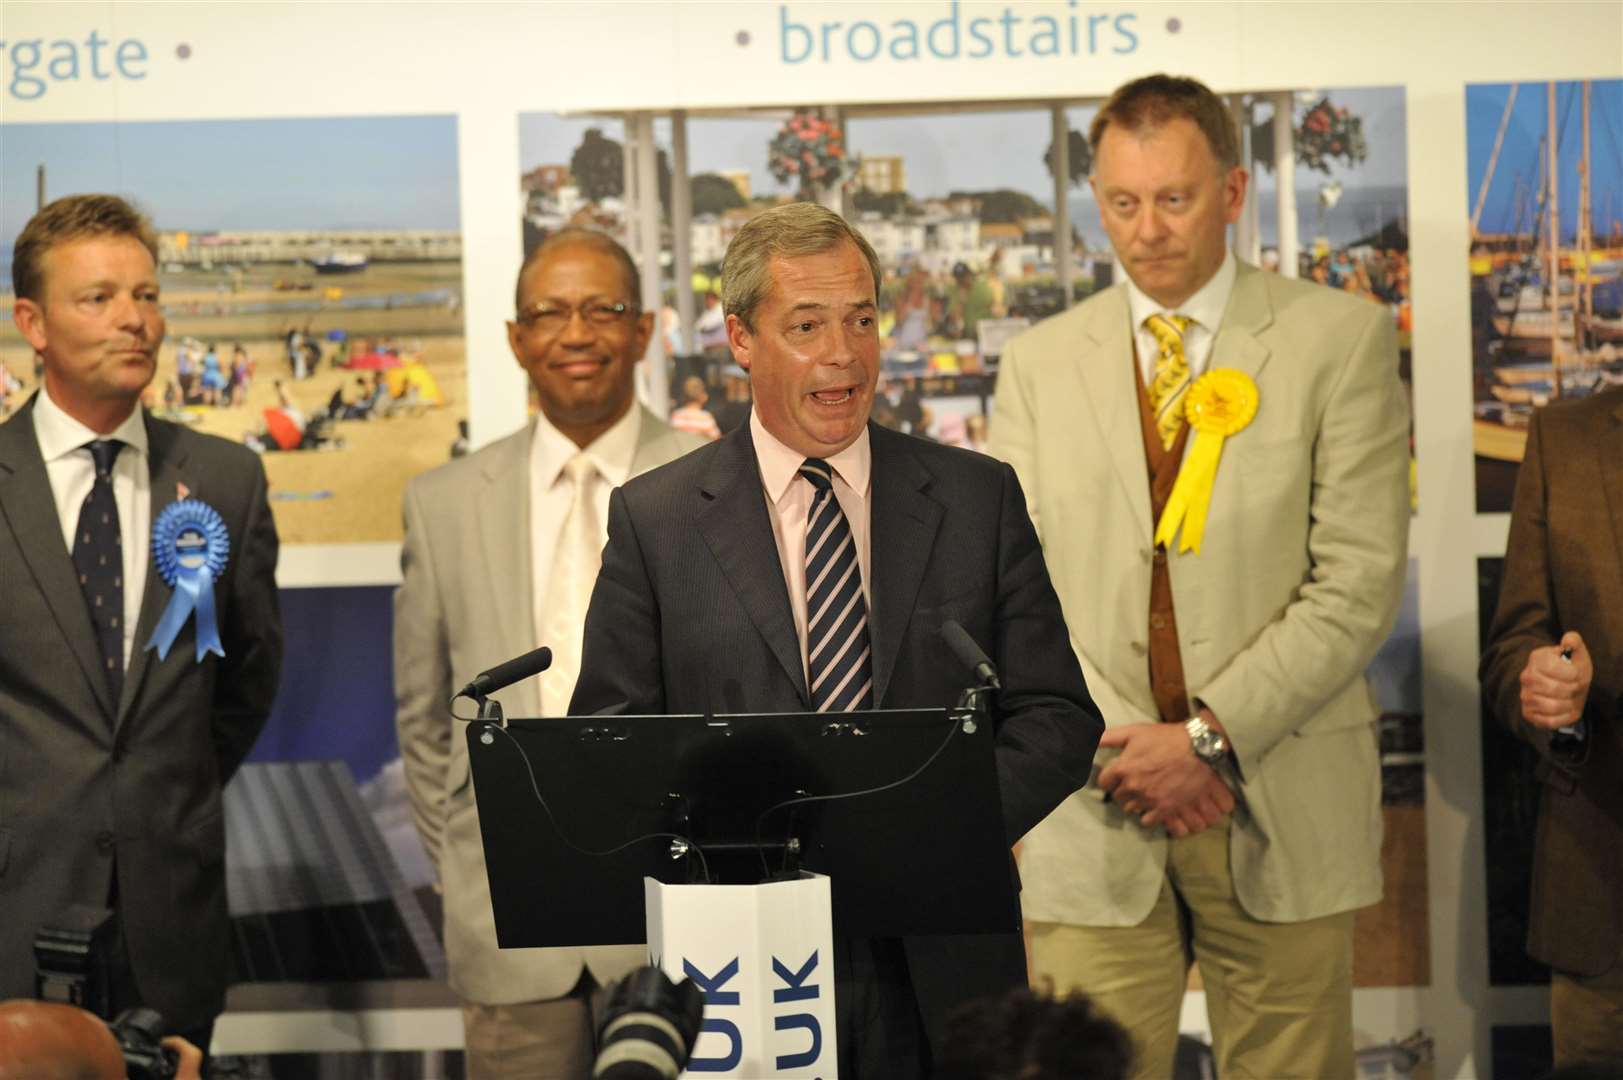 Pictured at the count, Craig Mackinlay, far left, was up against Nigel Farage in the South Thanet seat in the 2015 General Election